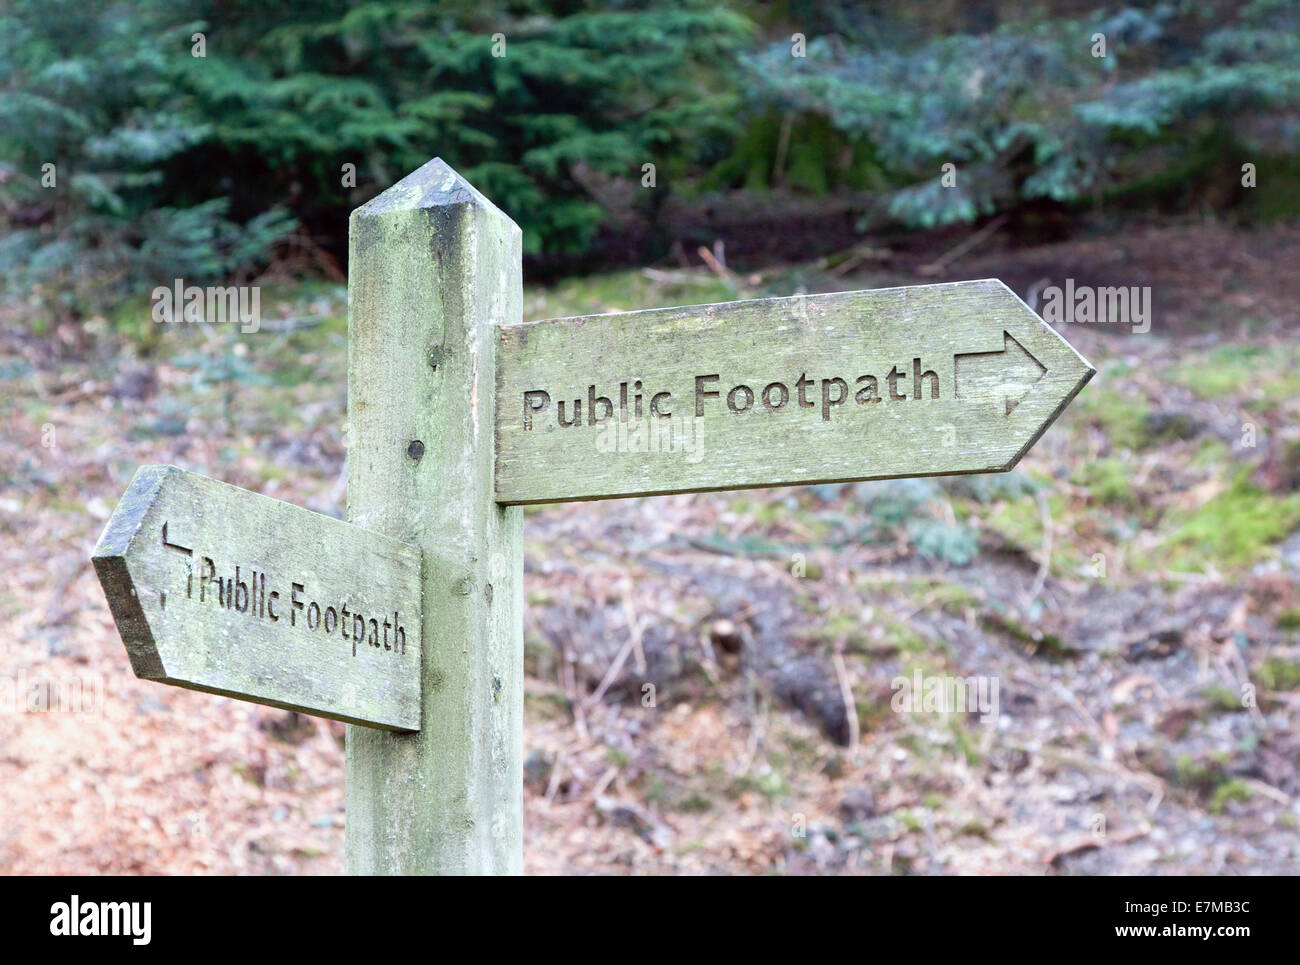 Public footpath finger post showing two different directions Stock Photo